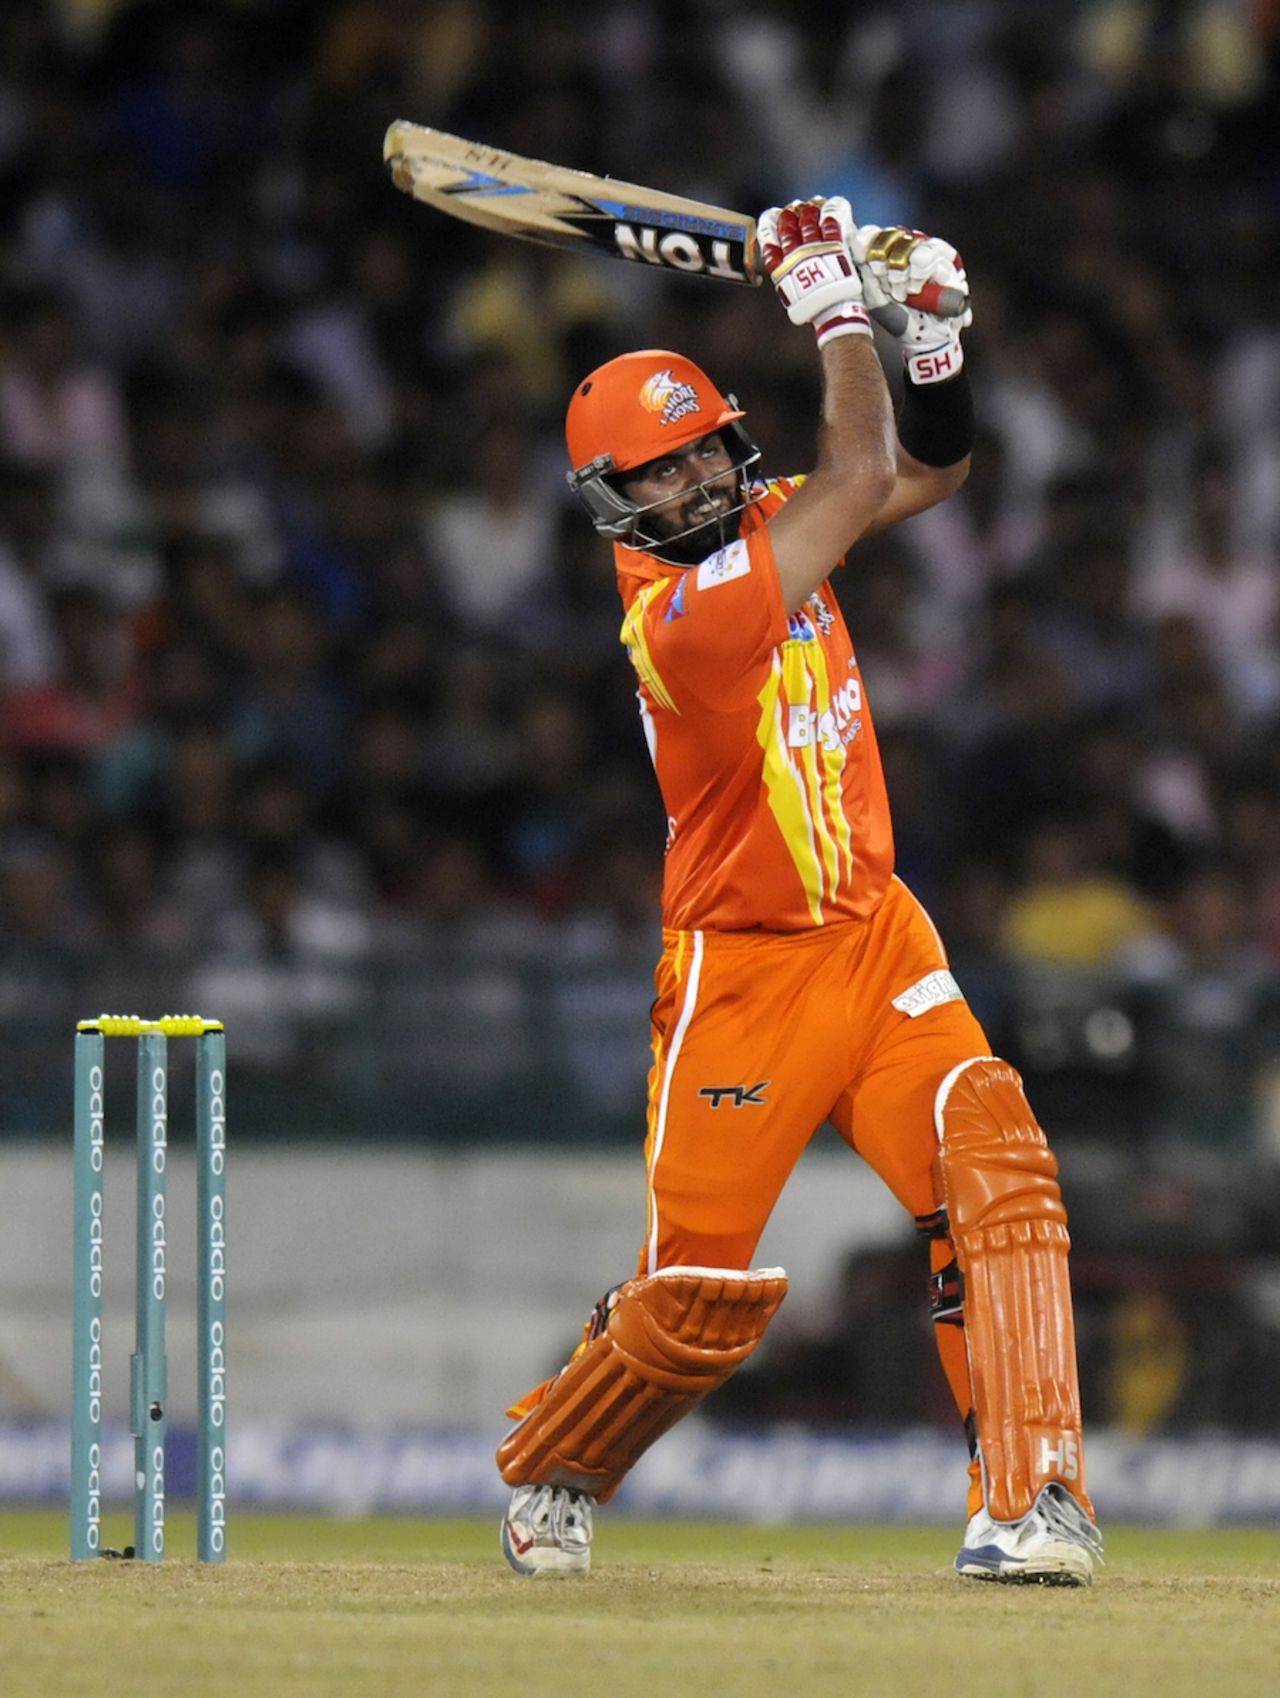 Ahmed Shehzad gave his team a strong start, Mumbai Indians v Lahore Lions, CLT20 qualifier, Raipur, September 13, 2014